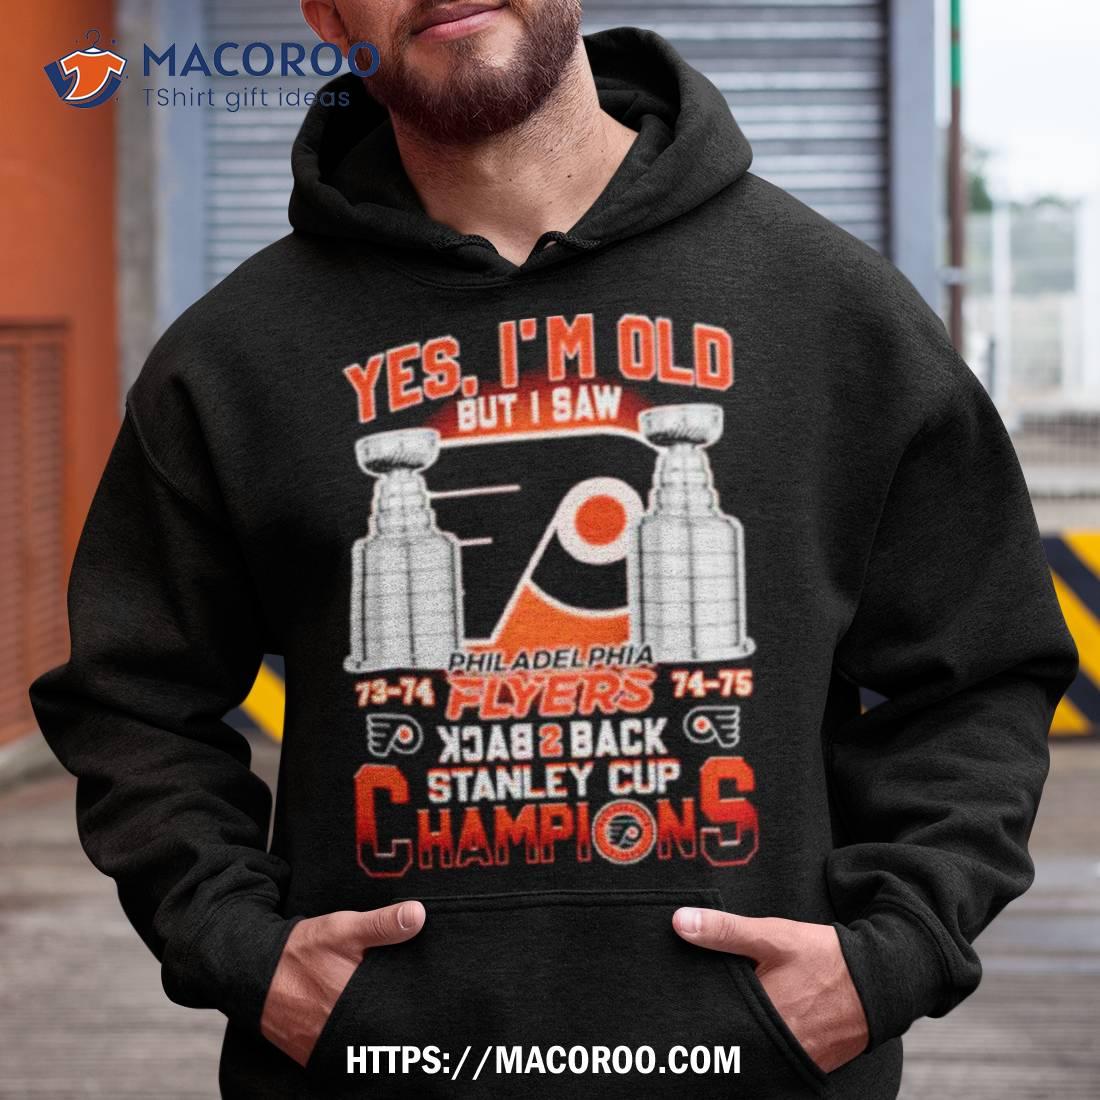 https://images.macoroo.com/wp-content/uploads/2023/10/yes-i-m-old-but-i-saw-philadelphia-flyers-back-2-back-stanley-cup-champions-shirt-hoodie.jpg